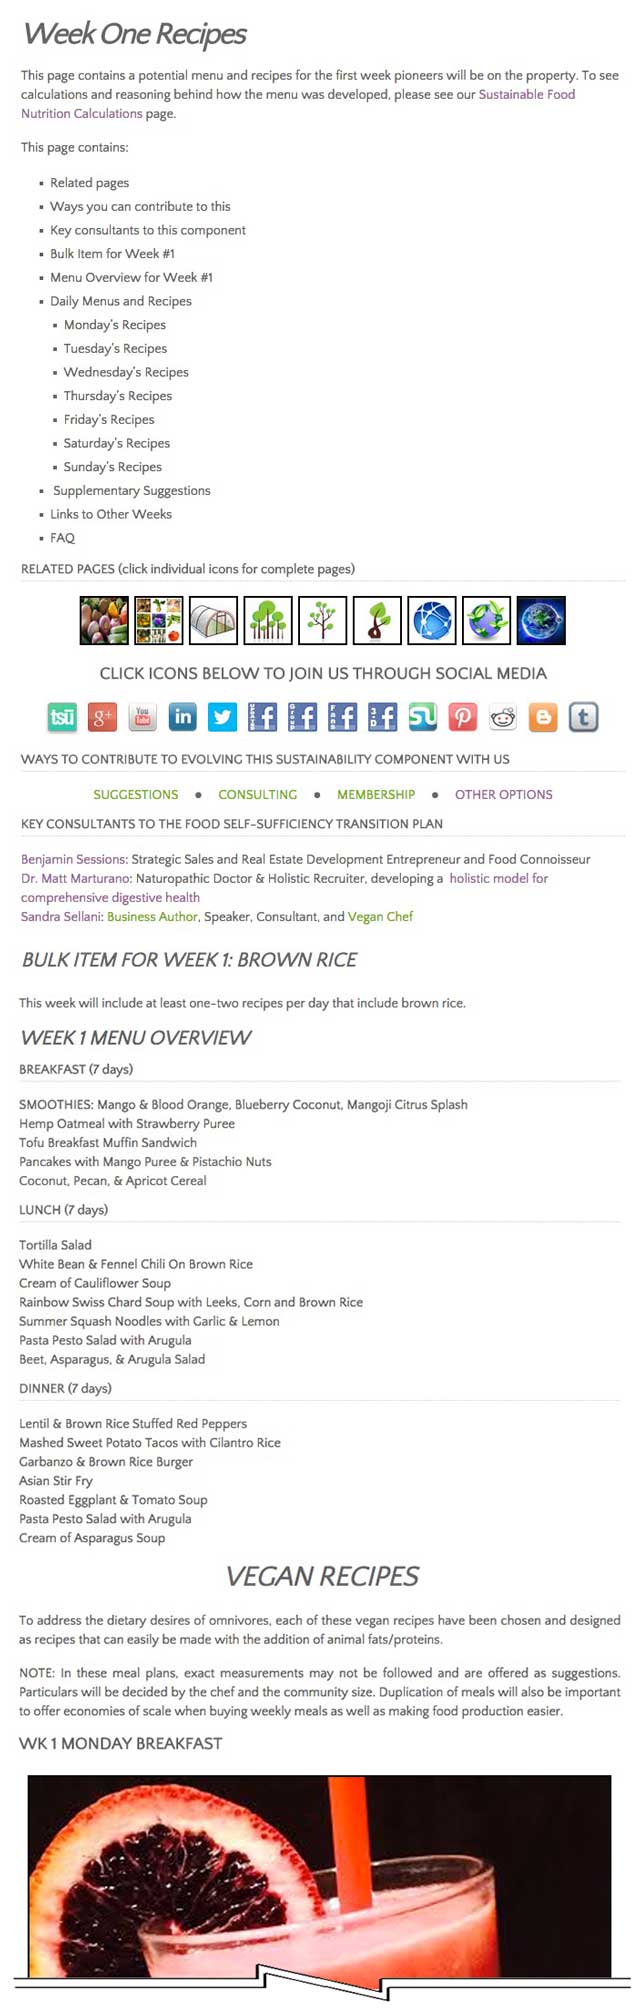 completed another 10% on the organization of the streamlined version of our Food Self-sufficiency Transition Plan page, which includes contributions provided by Naturopathic Doctor Matt Marturano (creator of the COHERENT model for comprehensive digestive health). This week we added anchor links & images to sections of the page and began creating breakout pages for specific weeks of recipes. 